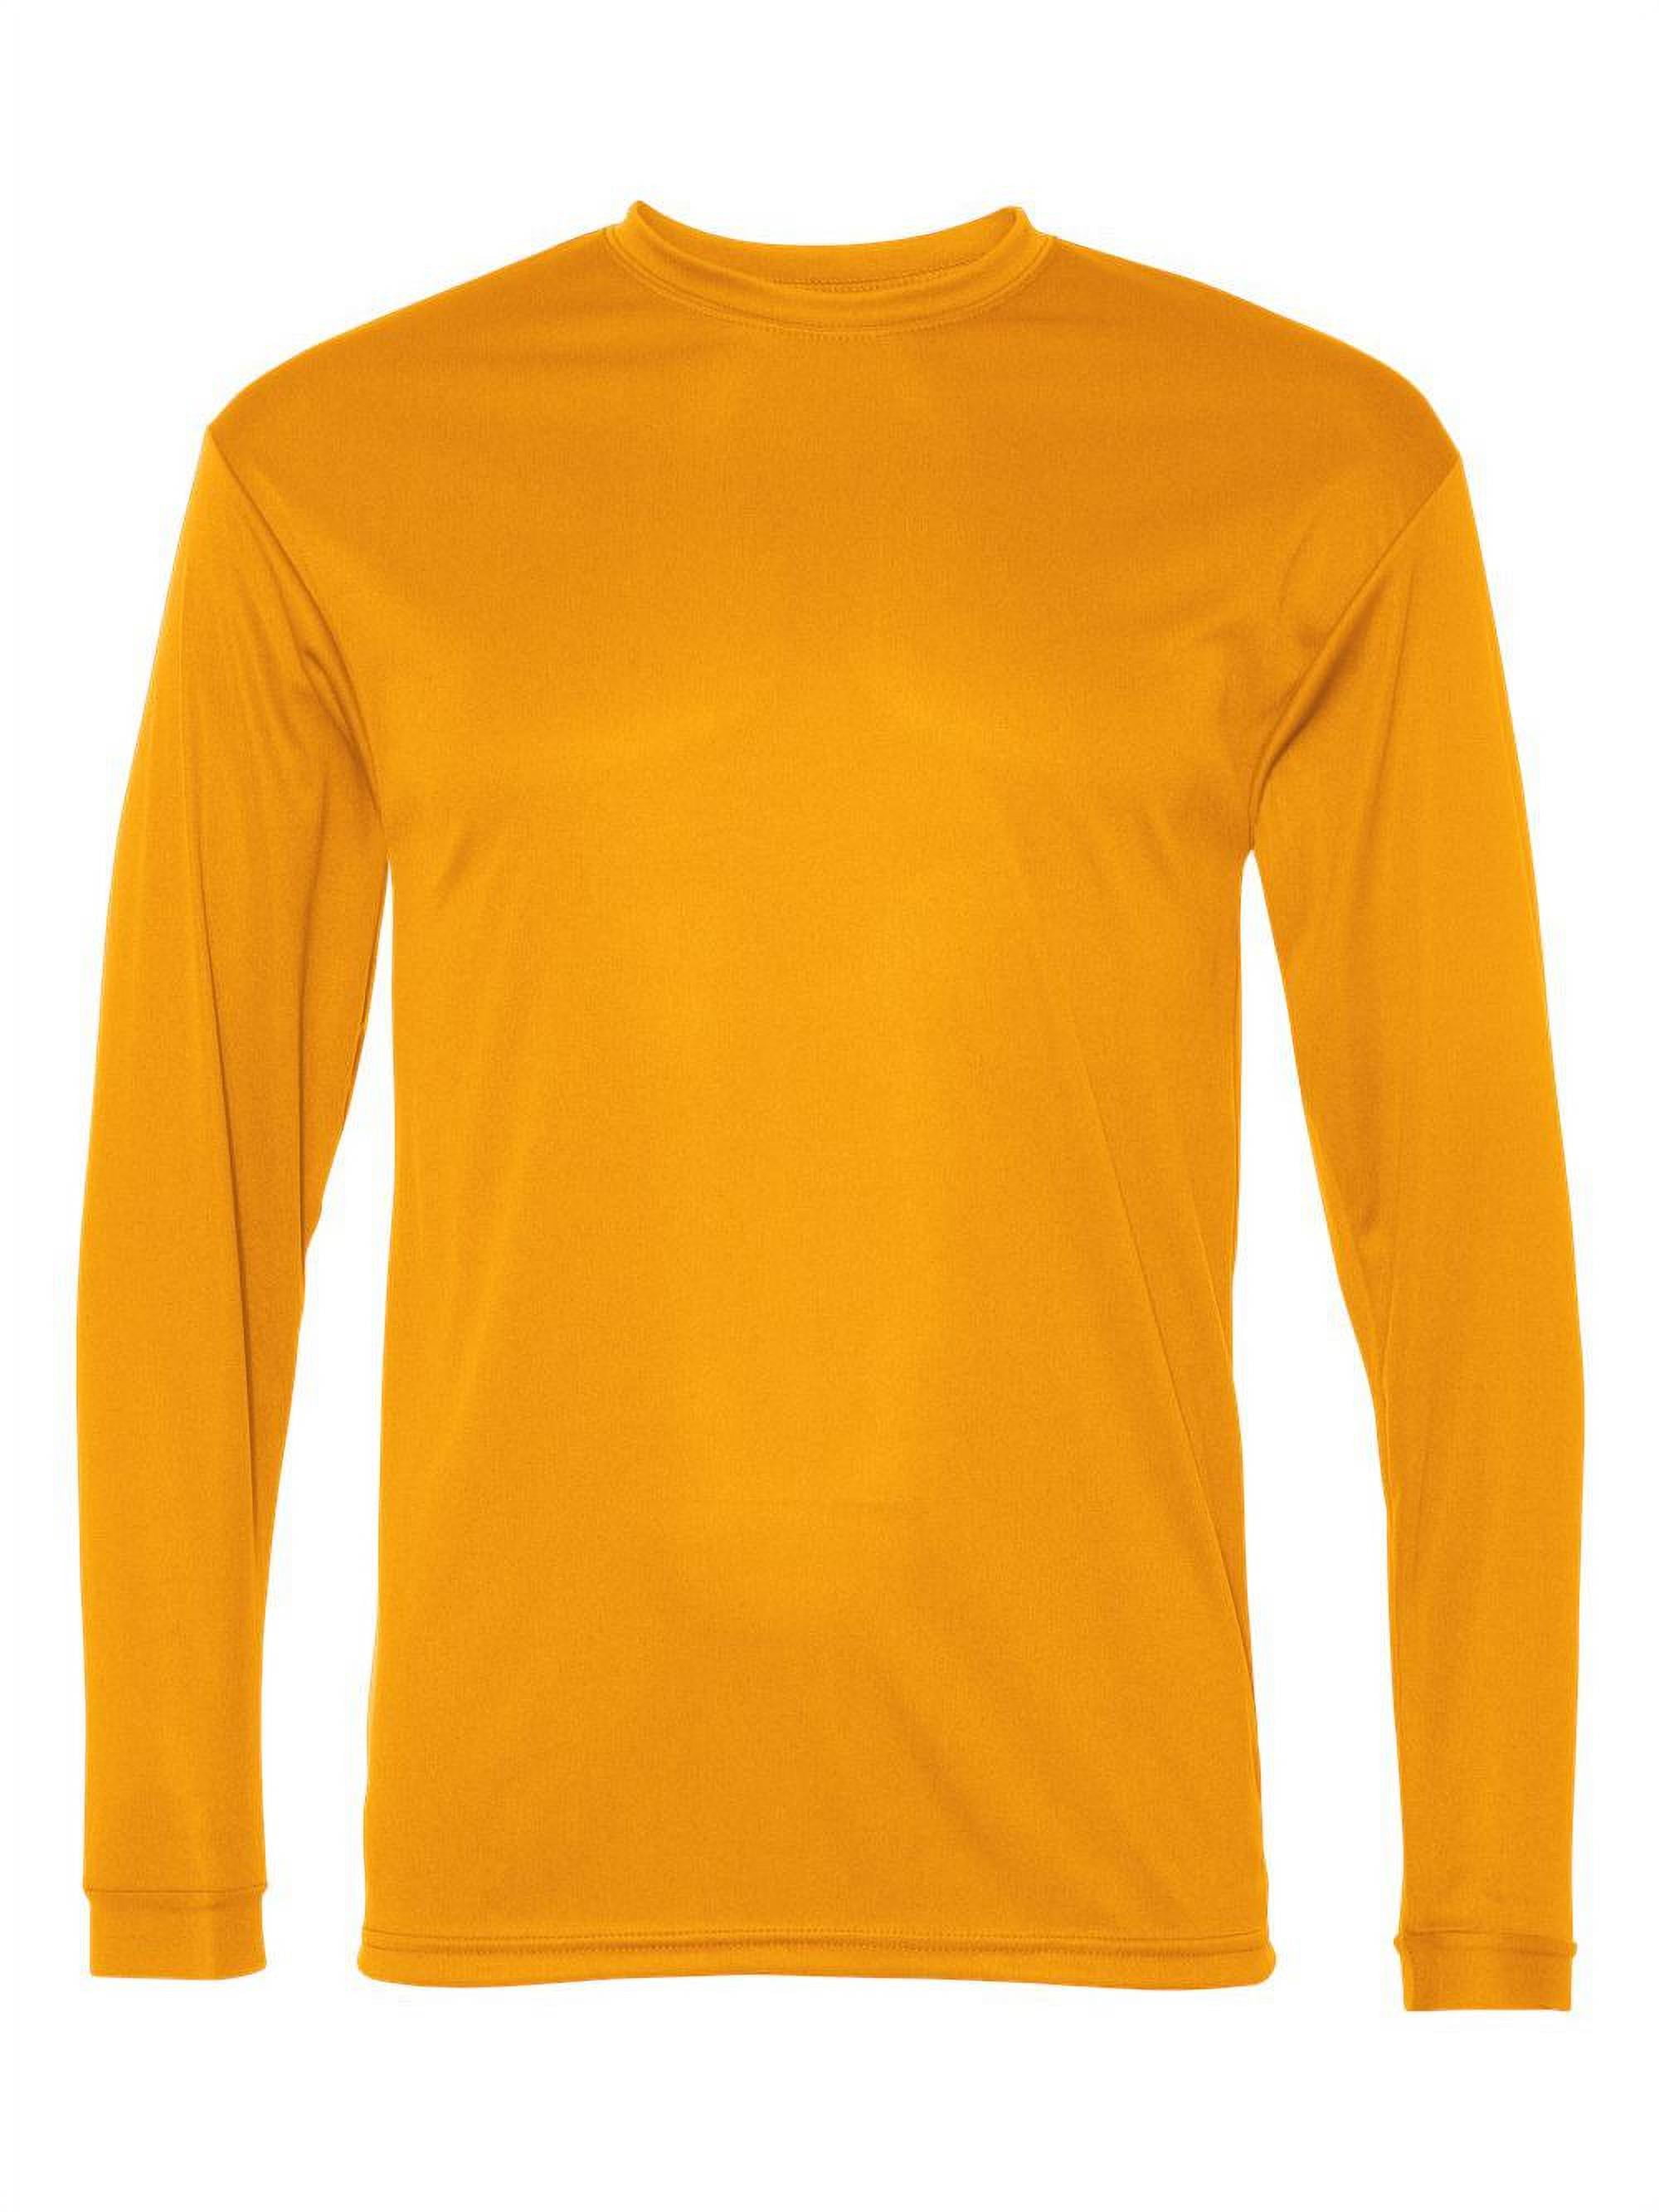 C2 Sport Performance Long Sleeve T-Shirt in Gold L